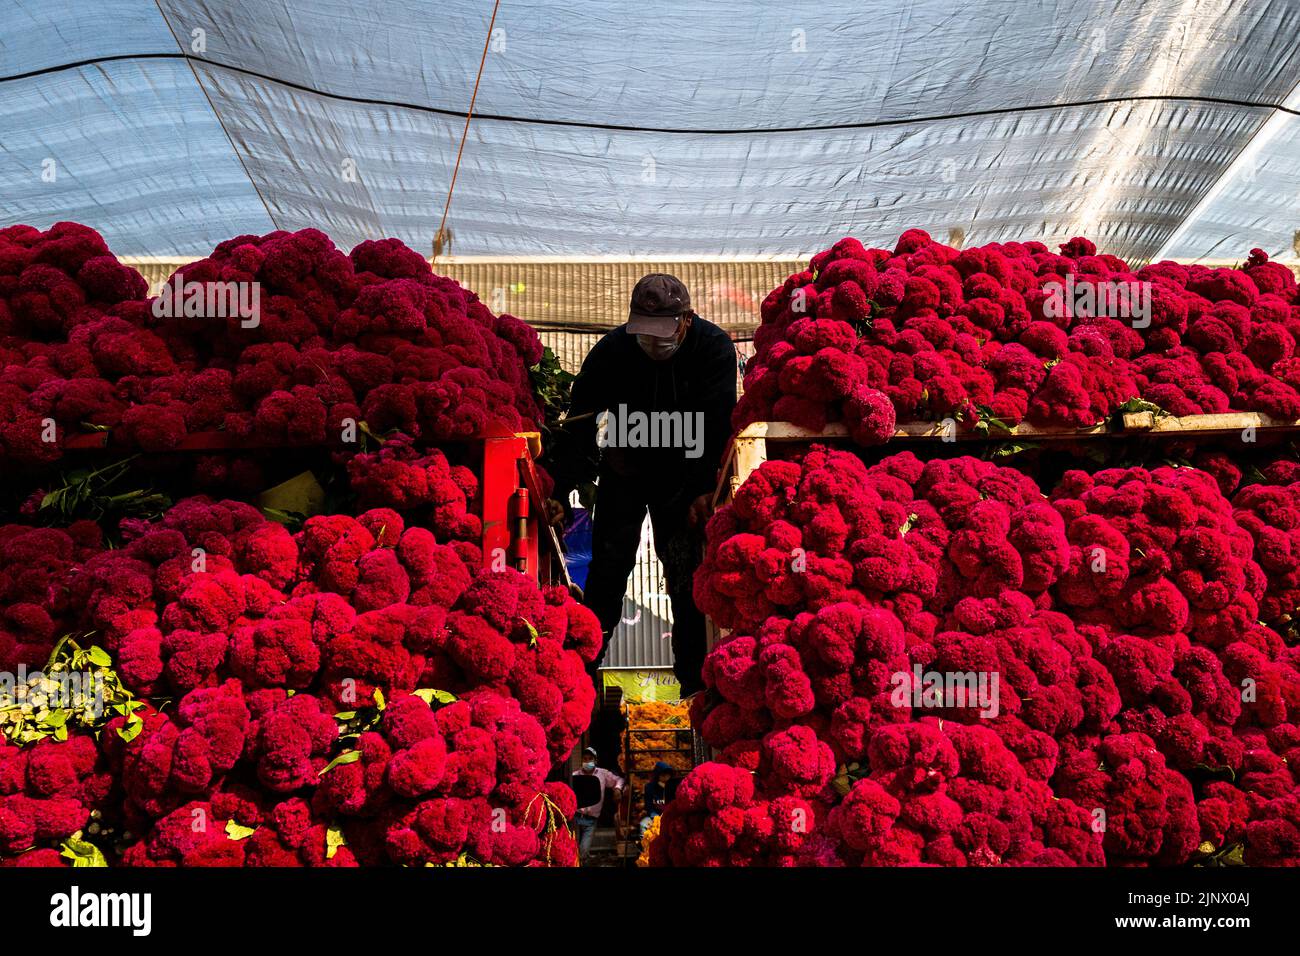 A Mexican farmer stands on the back of a truck selling bunches of marigold flowers for the Day of the Dead celebrations in Mexico City, Mexico. Stock Photo